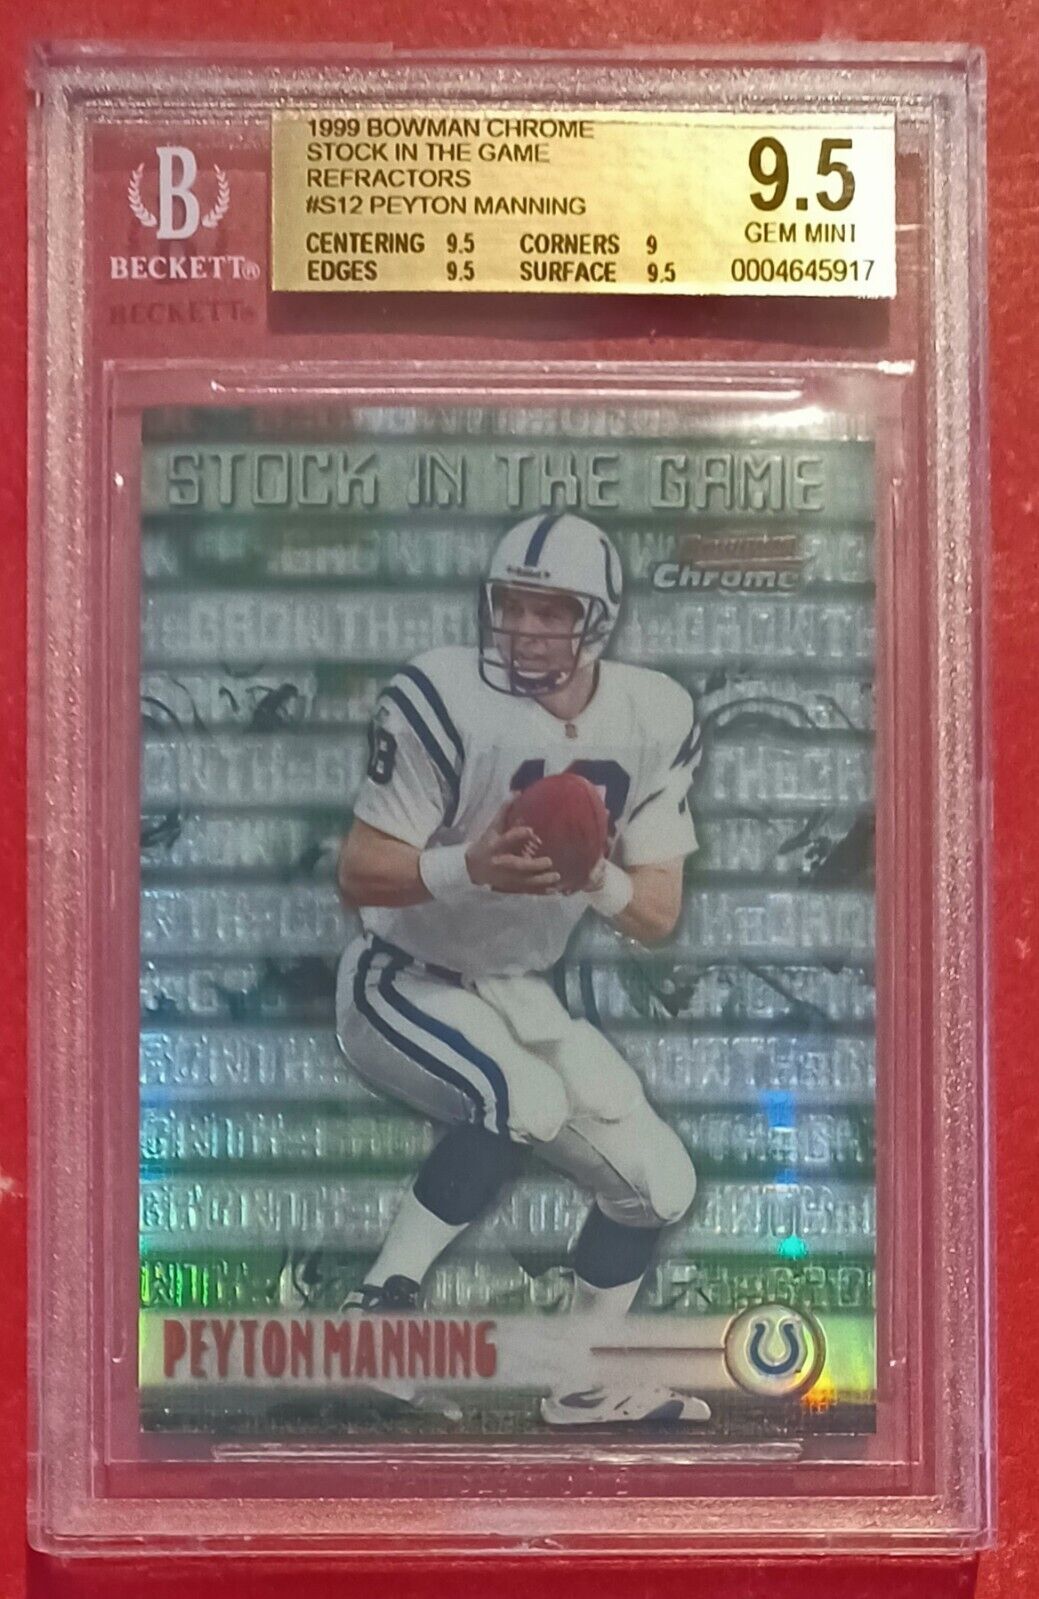 1999 Bowman Chrome #S12 Peyton Manning Stock In the Game Refractors BGS 9.5 Gem!